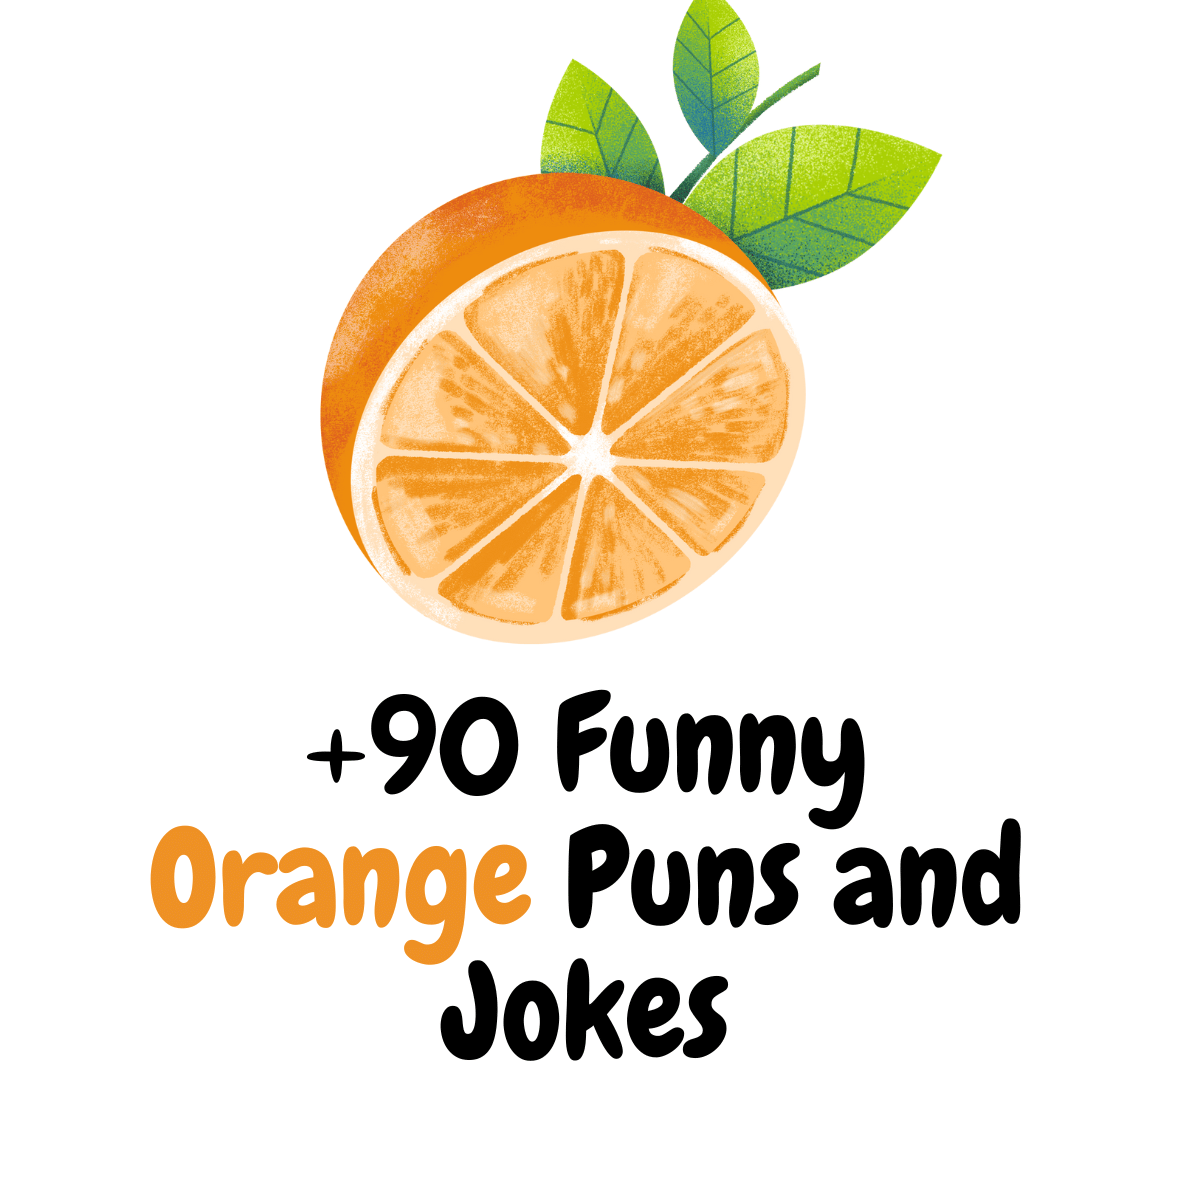 +90 Orange Puns and Jokes: A Playful Collection of Citrus Humor